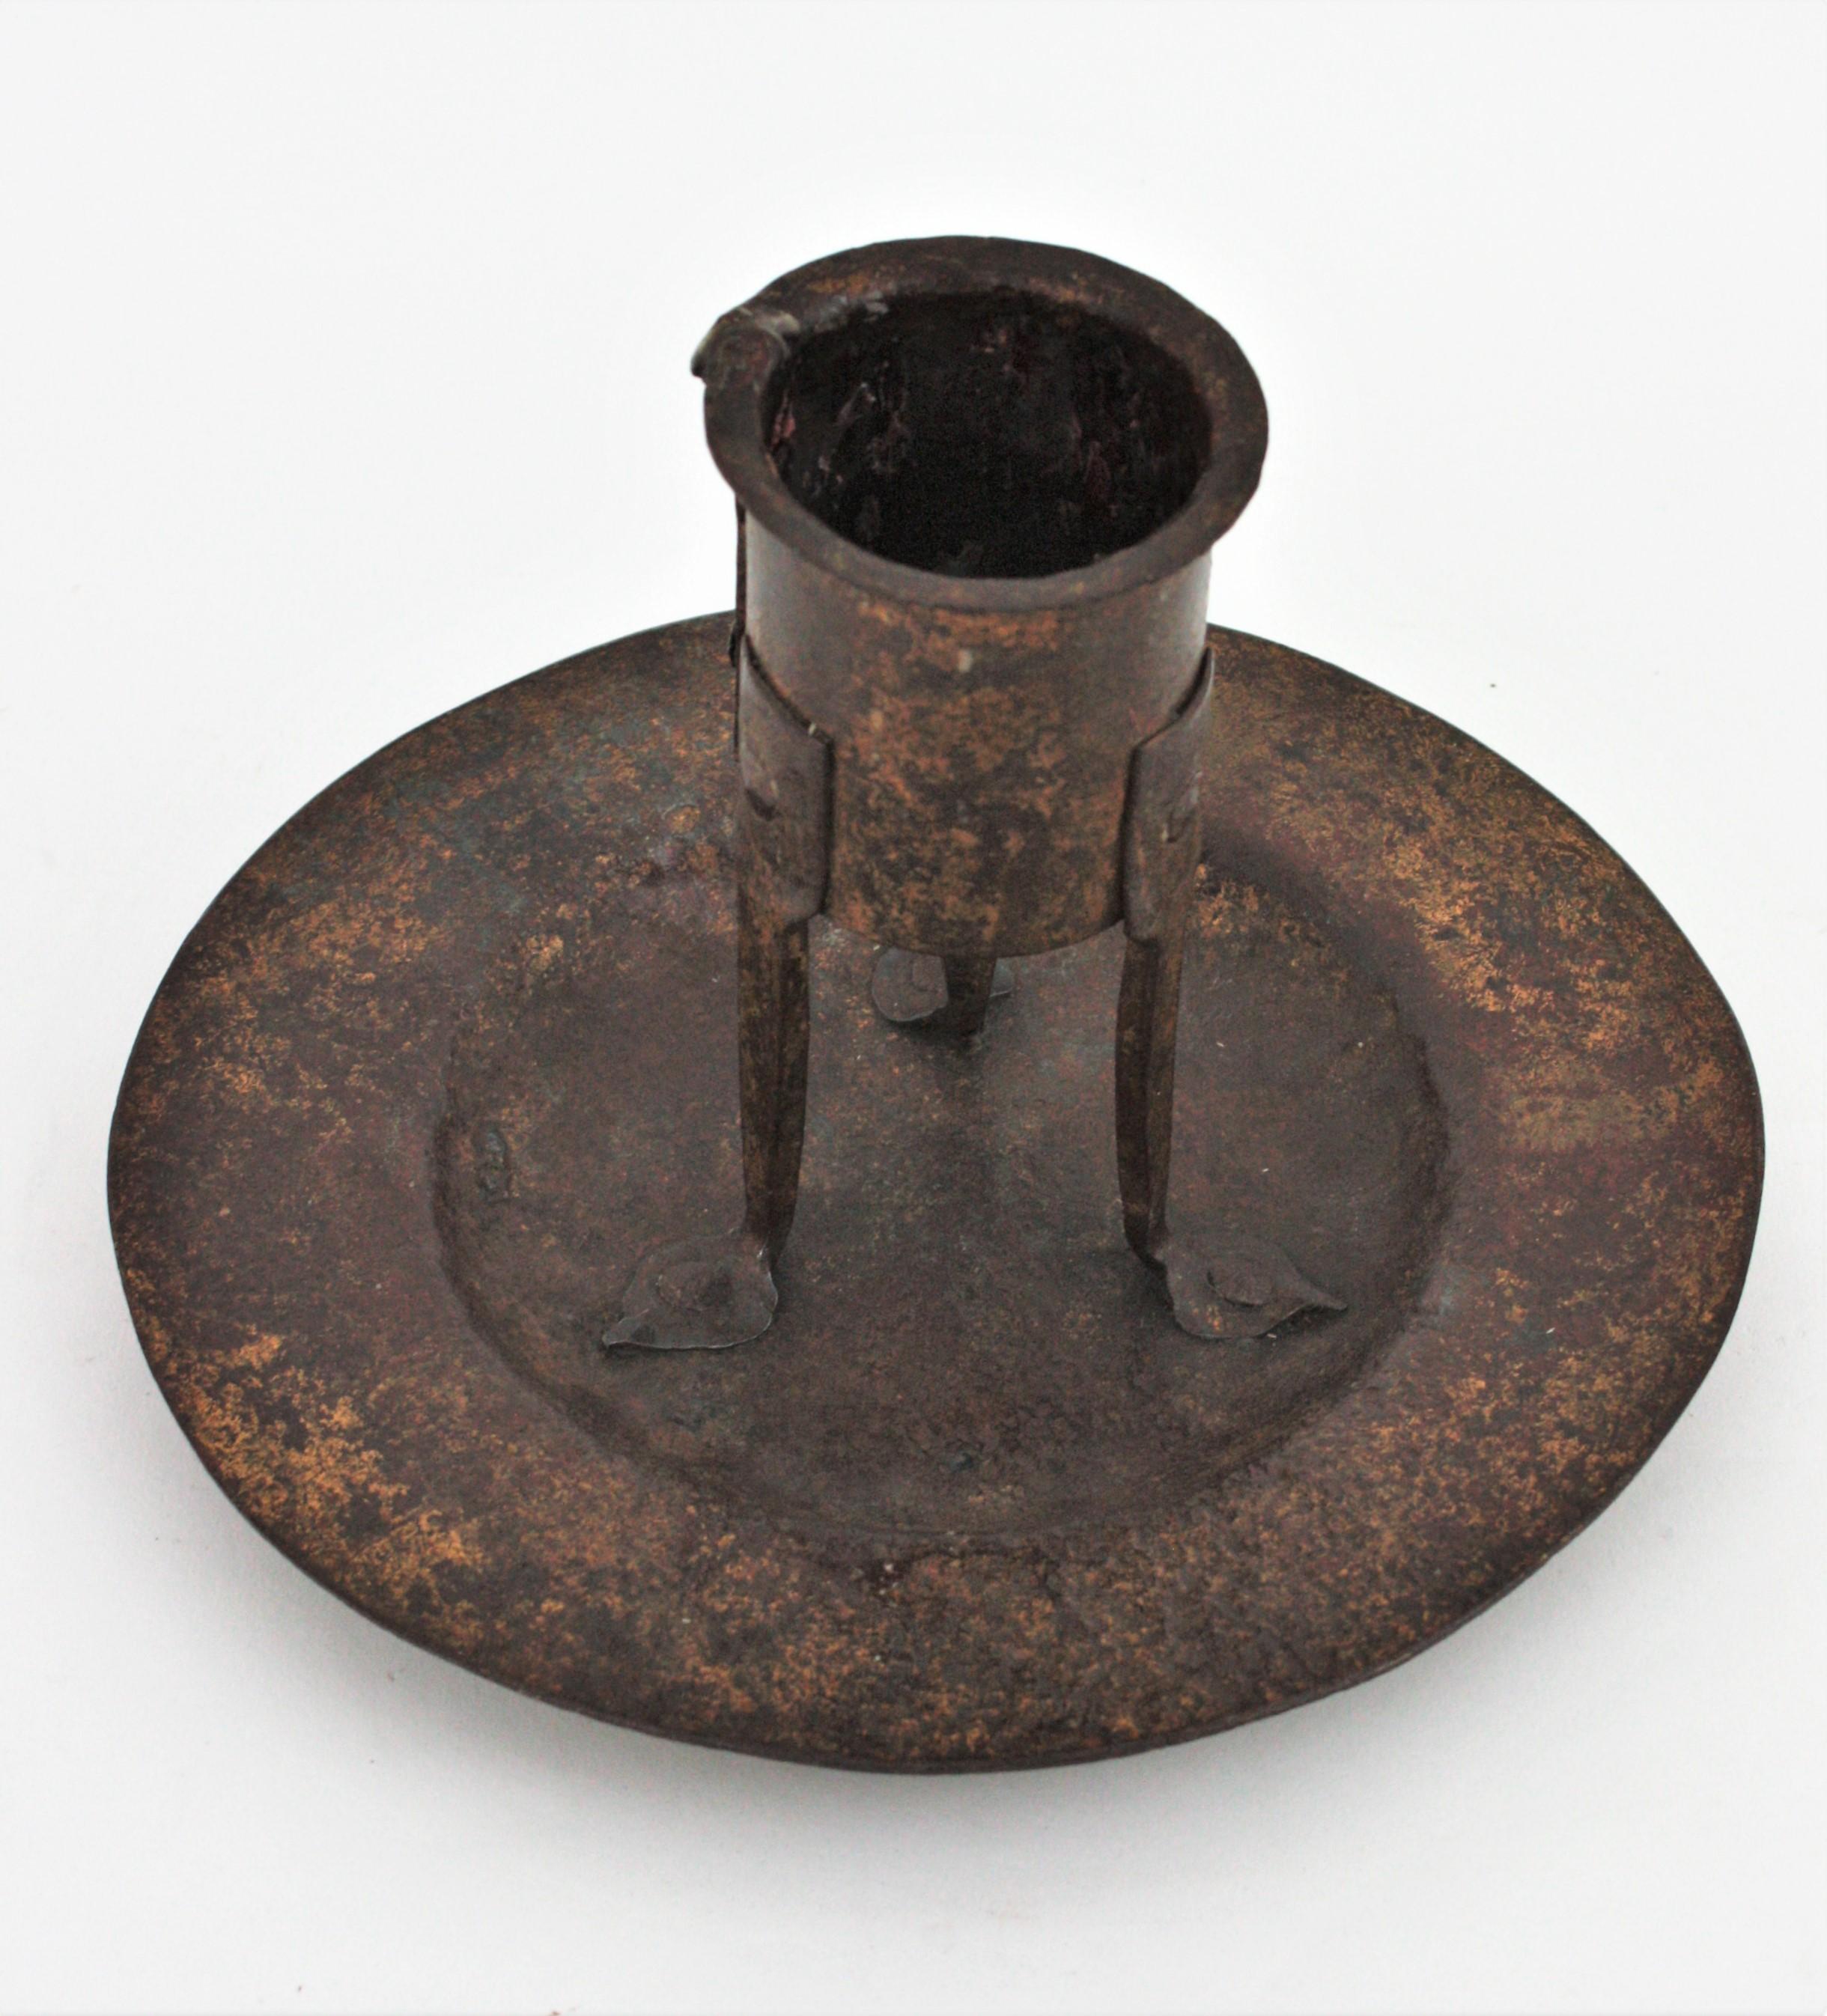 17th Century Medieval Parcel-Gilt Hand Forged Iron Candleholder, Spain, 16th Century